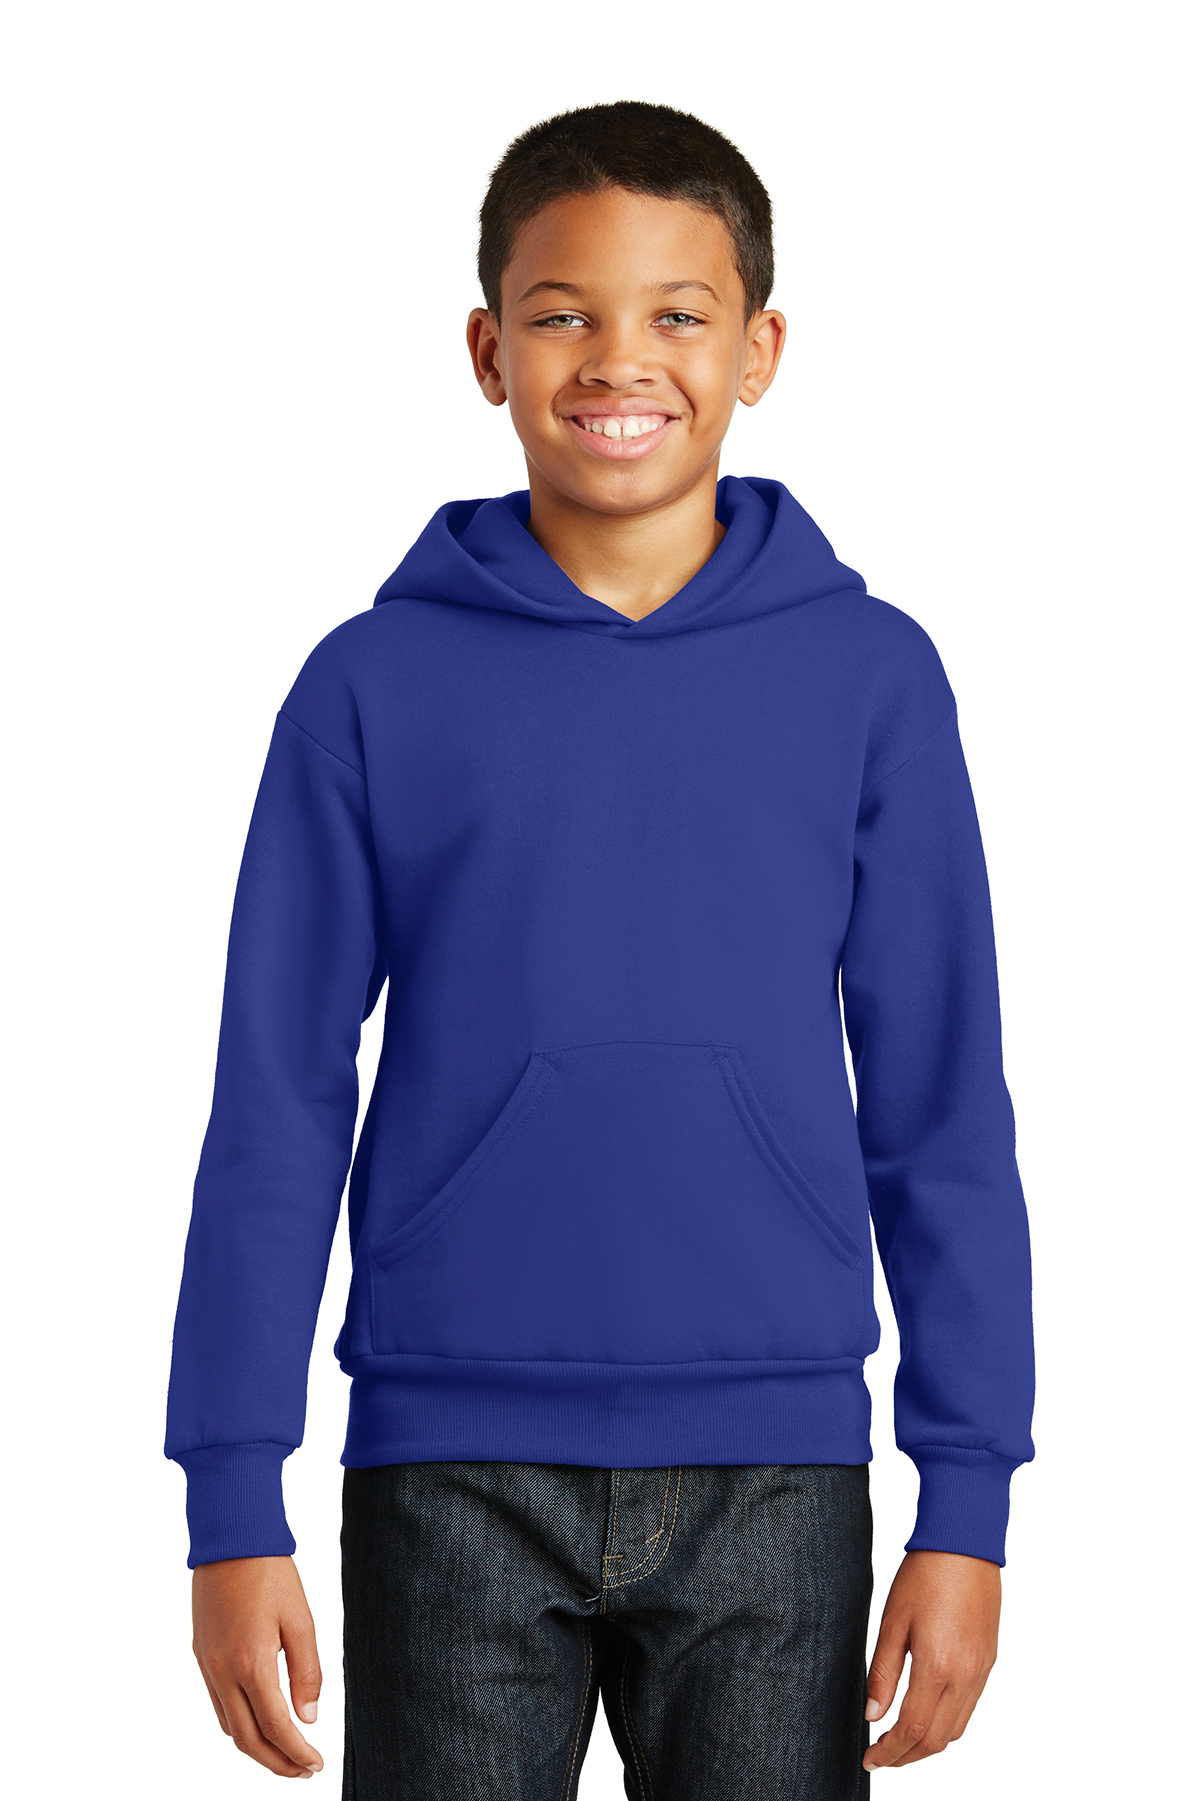 Youth Hanes Hoodies, Custom Embroidered With Your Logo!